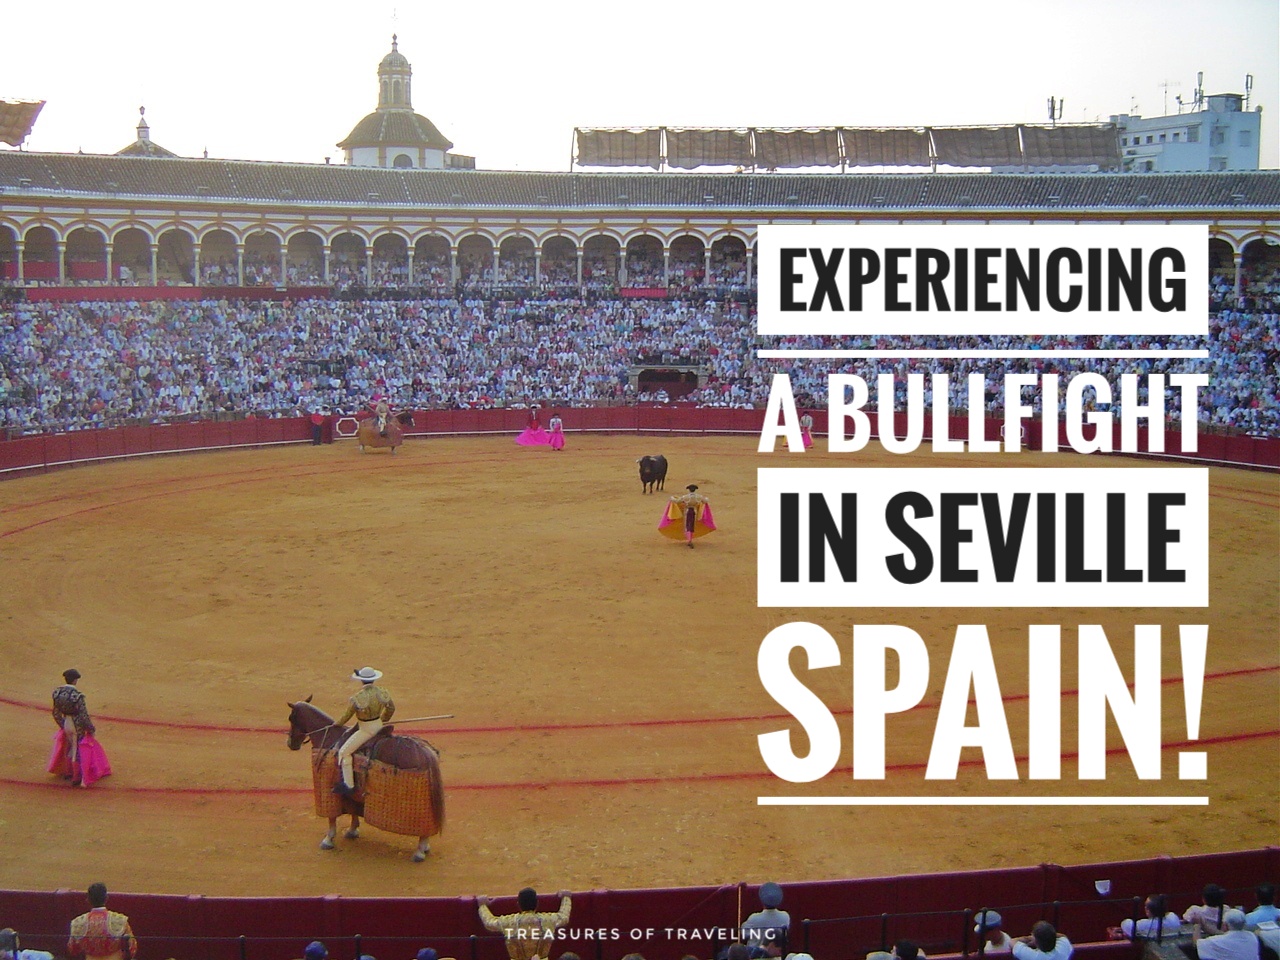 Experiencing a Bullfight in Seville Spain! Treasures of Traveling